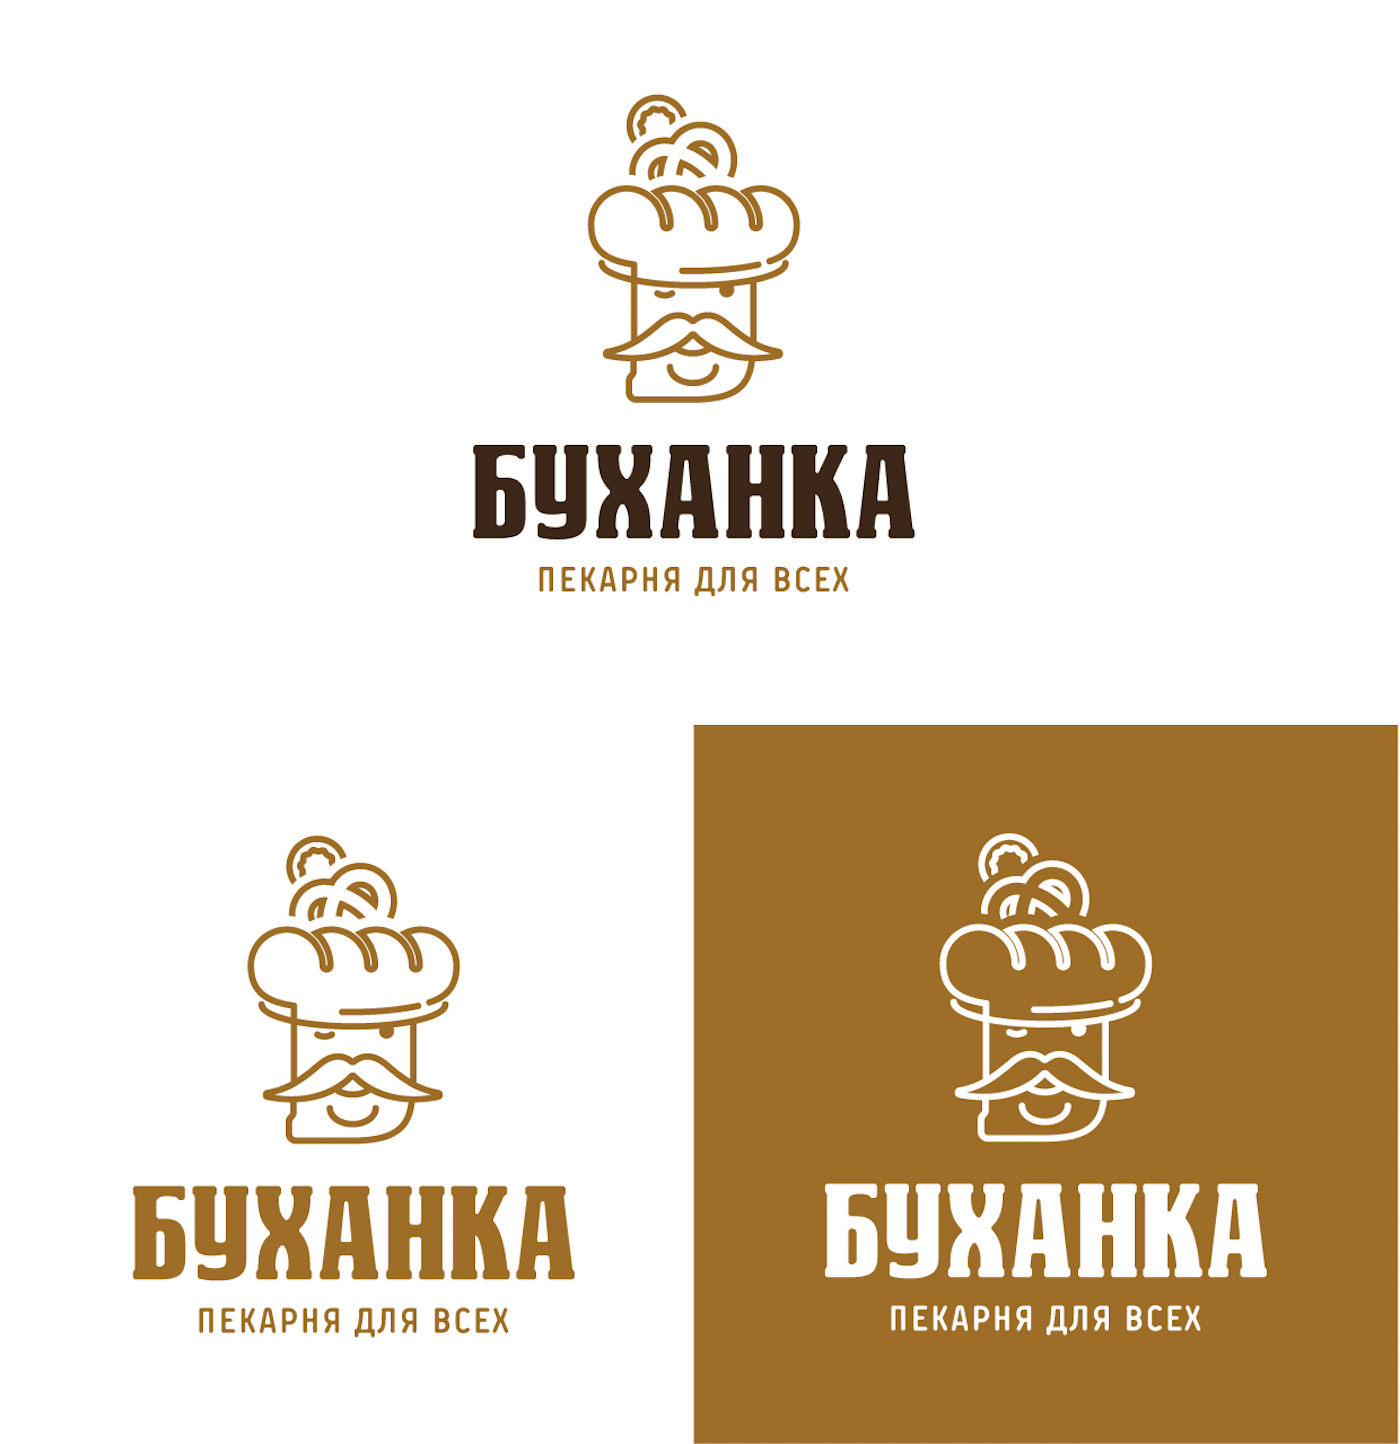 bakery loaf bread cooking logo Style Shopping spb Russia